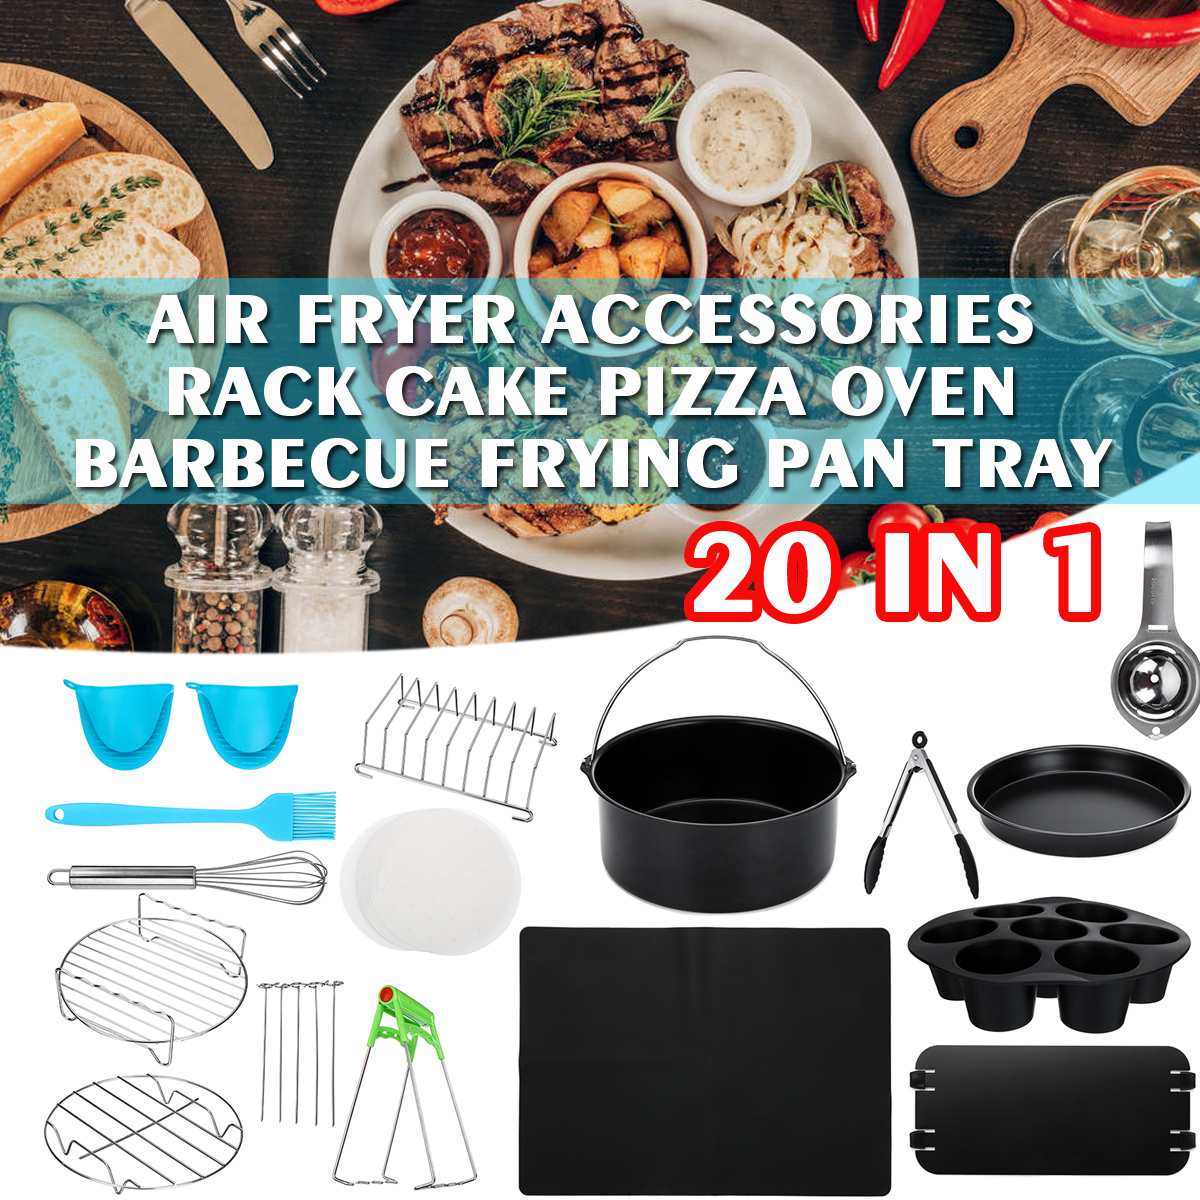 20Pcs Air Fryer Accessories Home Kitchen Cooking Tools For Barbecue Baking Cooking Fit For 3.8-5.8QT Air Fryer